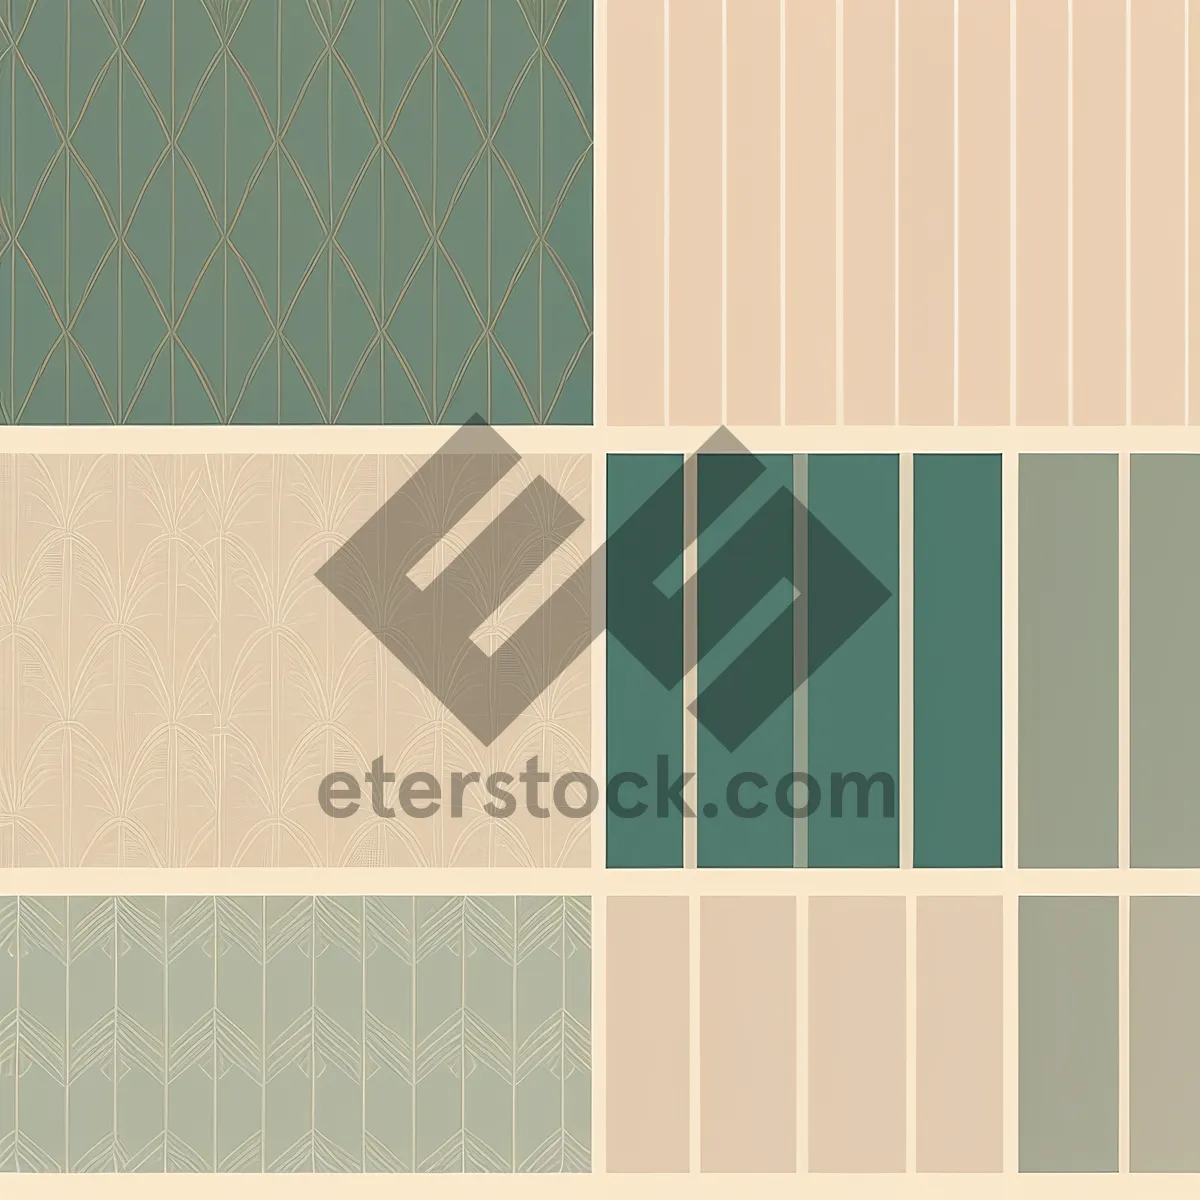 Picture of Checkered Mosaic Tile Design: Modern and Creative Graphic Backdrop